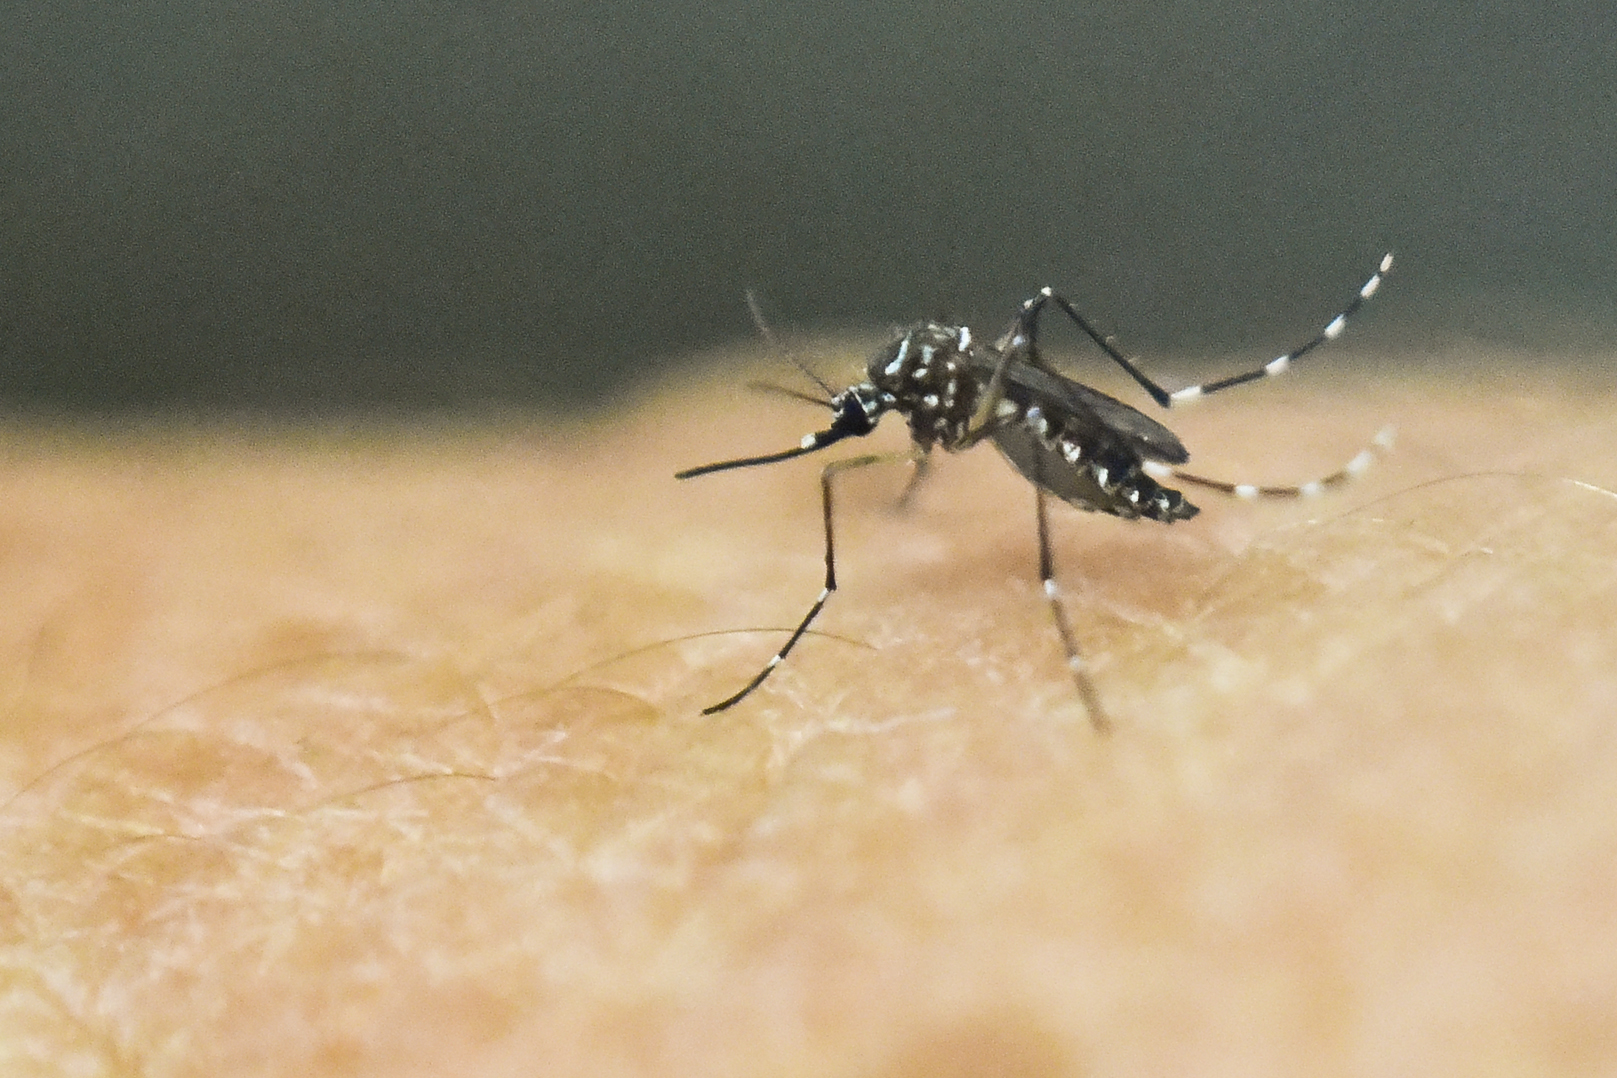 An Aedes Aegypti mosquito is photographed on human skin in a lab of the International Training and Medical Research Training Center (CIDEIM) on January 25, 2016, in Cali, Colombia. CIDEIM scientists are studying the genetics and biology of Aedes Aegypti mosquito which transmits the Zika, Chikungunya, Dengue and Yellow Fever viruses, to control their reproduction and resistance to insecticides. The Zika virus, a mosquito-borne disease suspected of causing serious birth defects, is expected to spread to all countries in the Americas except Canada and Chile, the World Health Organization said. AFP PHOTO/LUIS ROBAYO / AFP PHOTO / LUIS ROBAYO